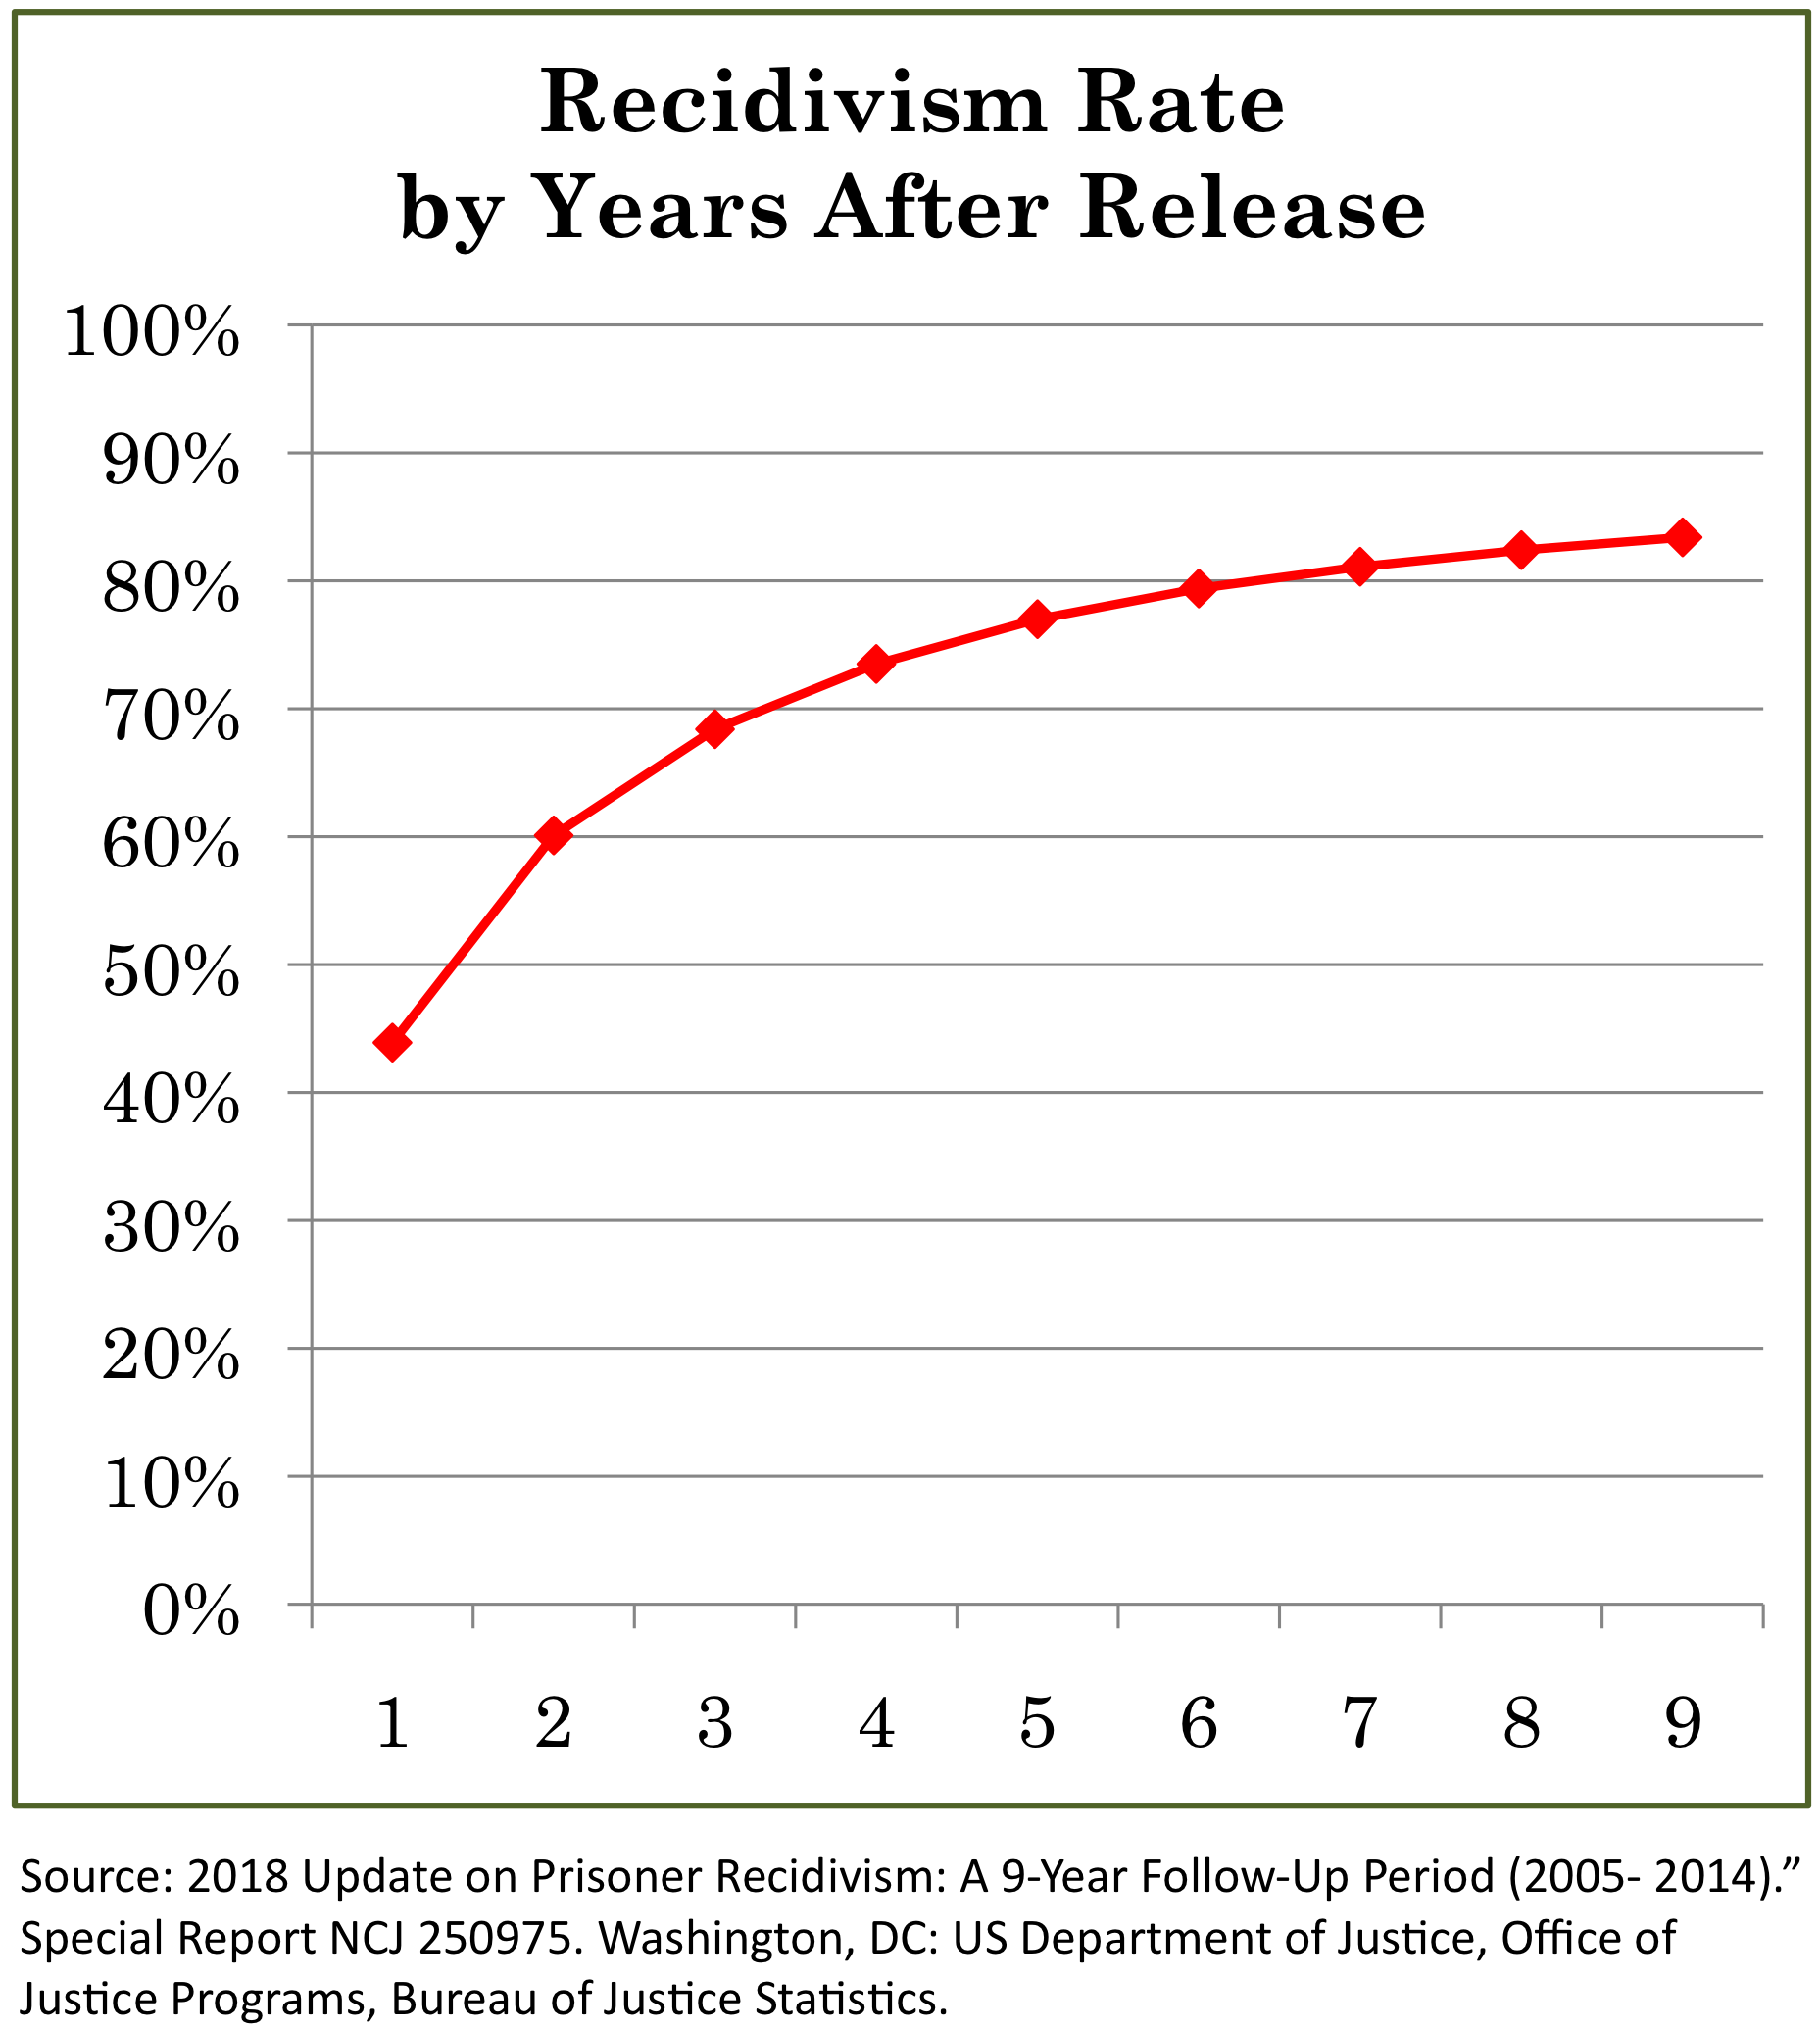 Recidivism Rate by Years After Release